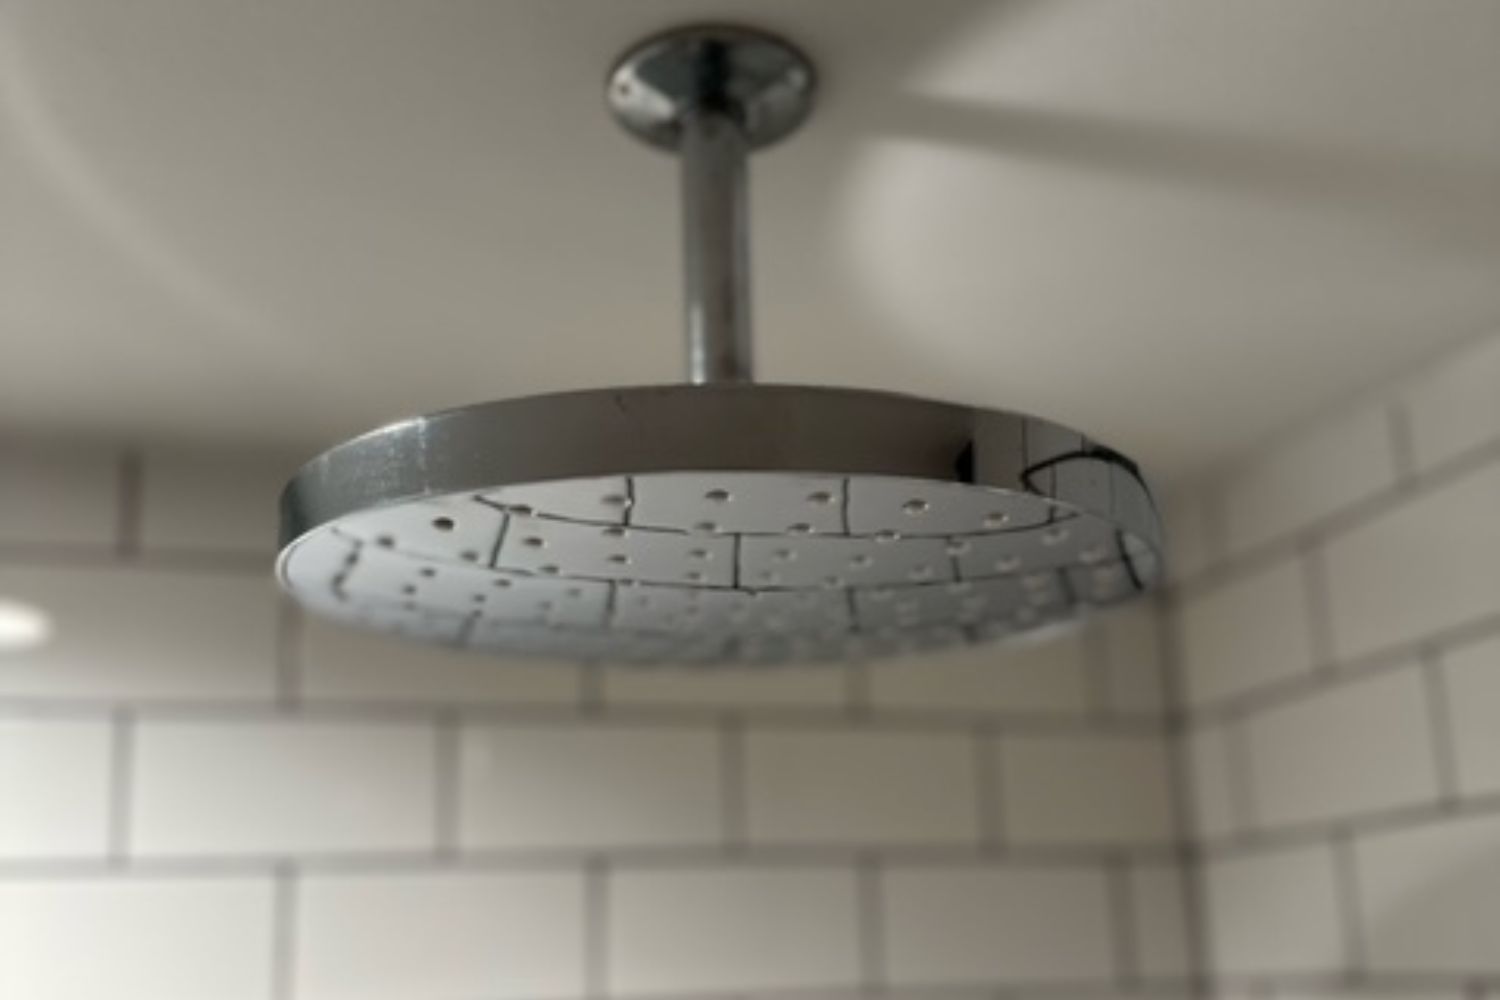 Durable rain shower head, tested and proven to withstand daily use